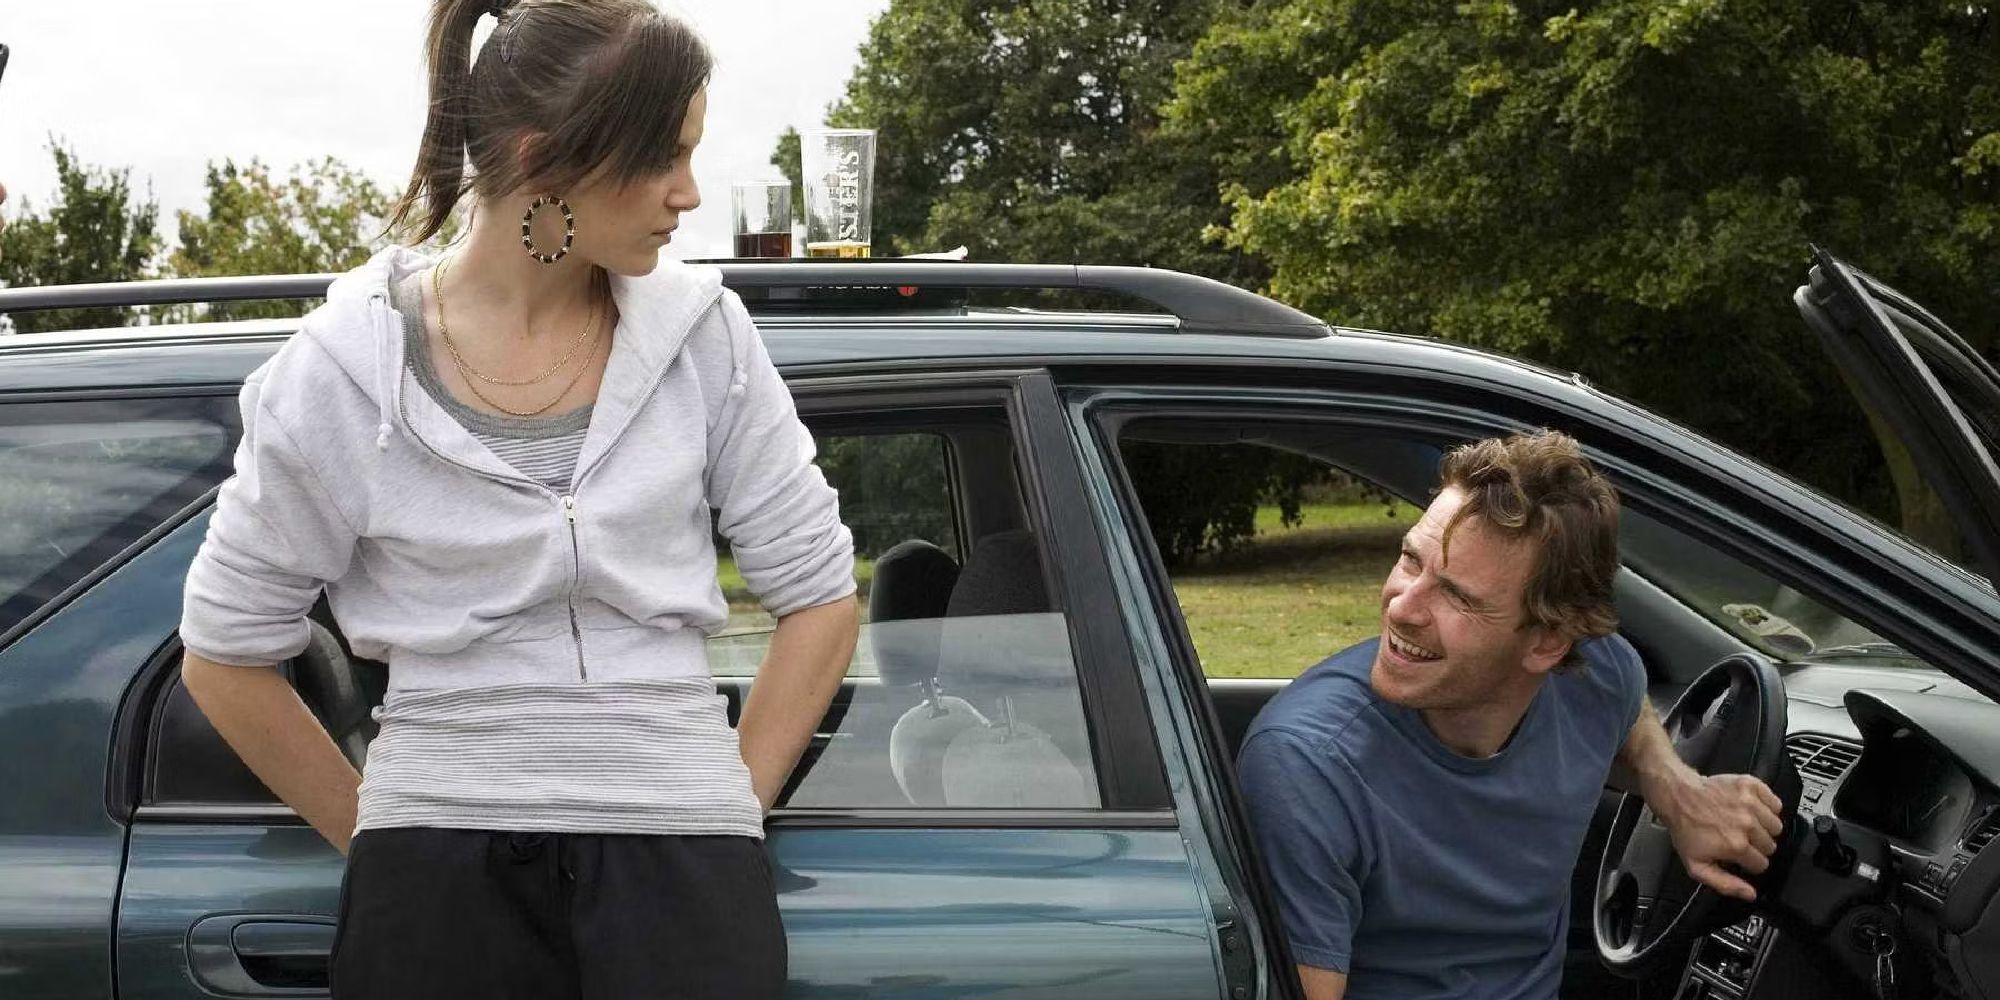 Katie Jarvis as Mia standing outside a car talking to Michael Fassbender as Connor in the film Fish Tank - 2009